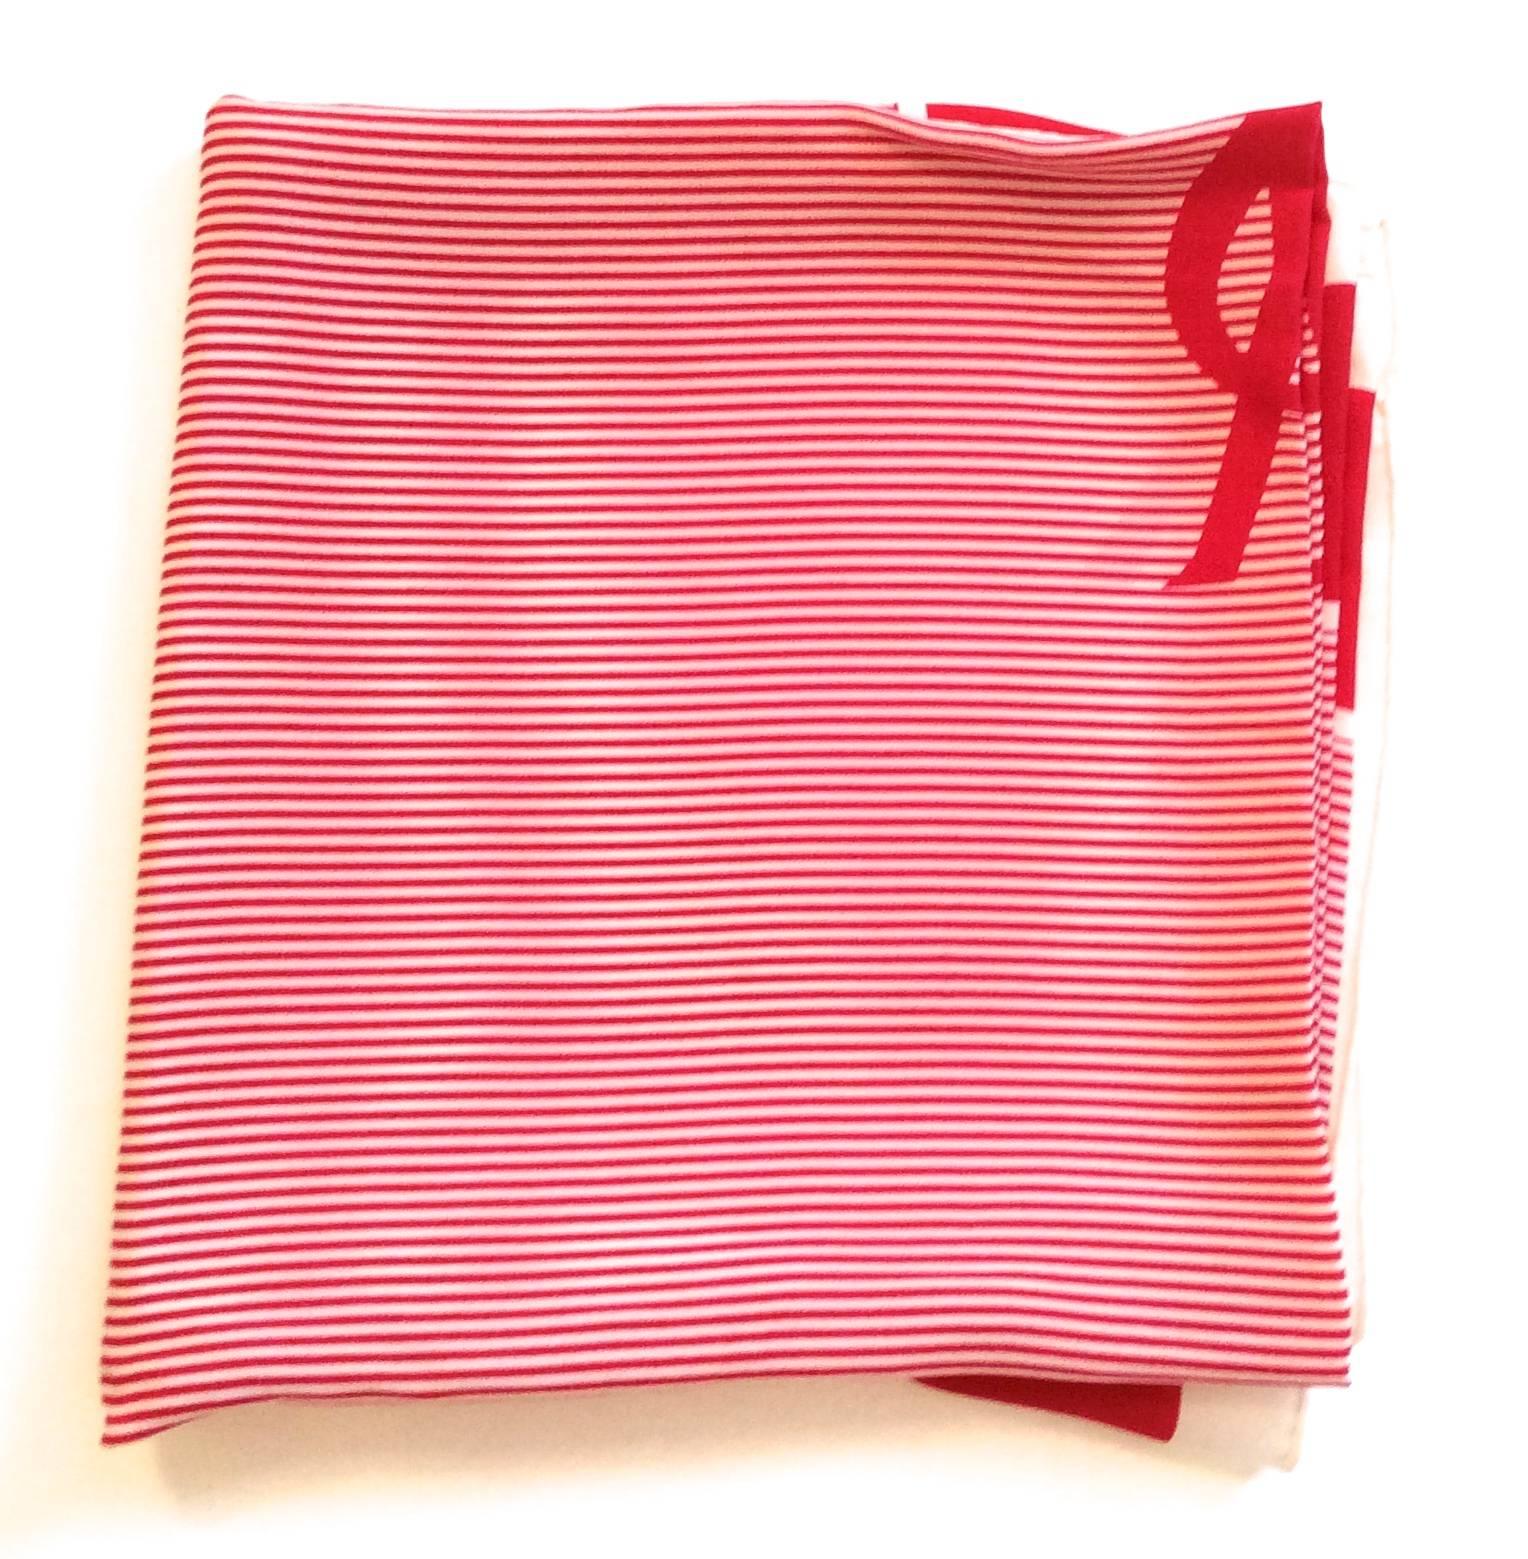 Yves Saint Laurent / YSL - 100% Silk Scarf - 1970's - Red and White In Excellent Condition For Sale In Boca Raton, FL